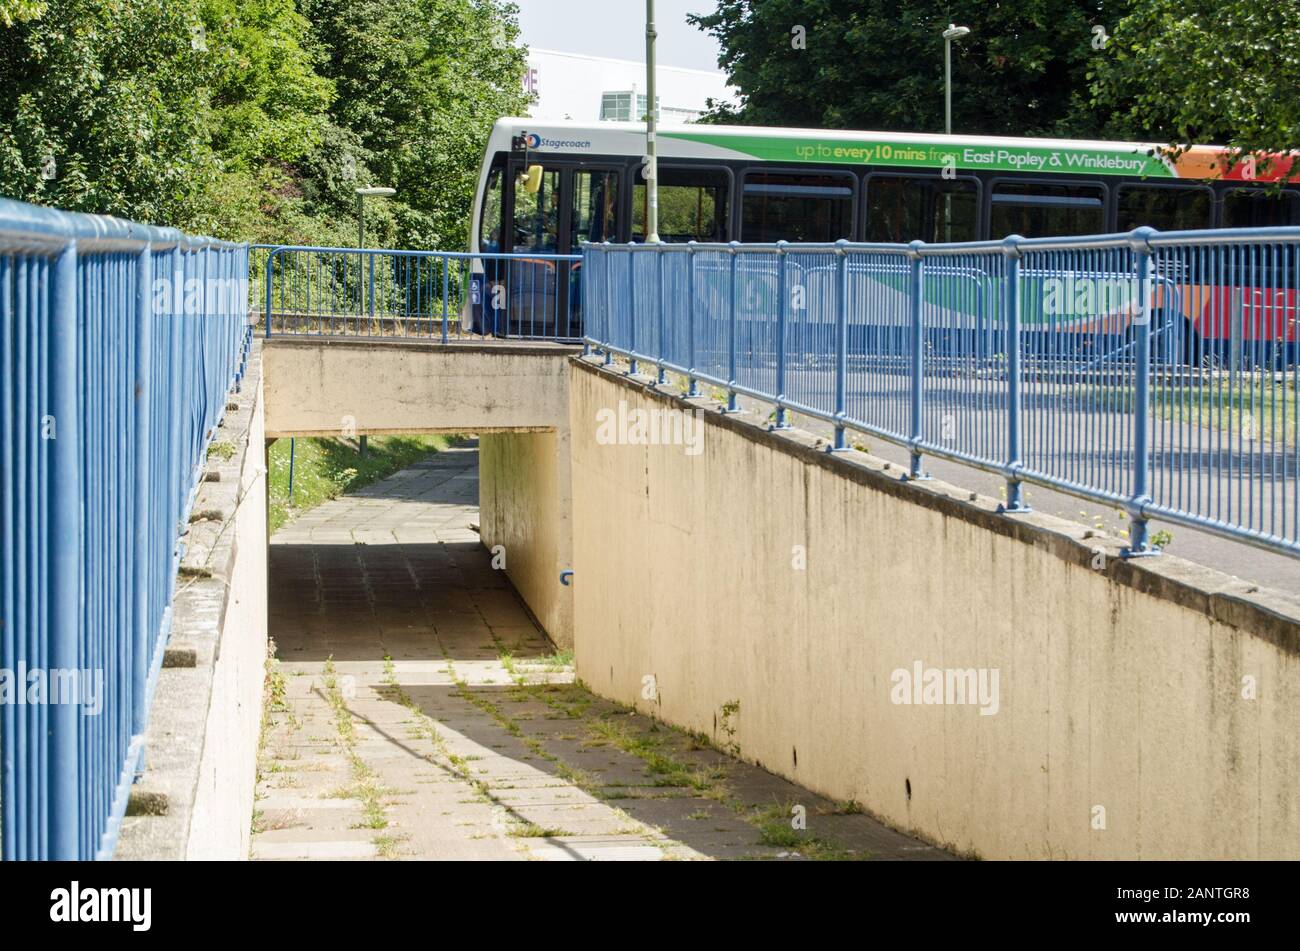 Basingstoke, UK - July 23, 2019:  Pedestrian footpath passing underneath a main road with a bus travelling overhead.  Sunny summer day in the Winklebu Stock Photo